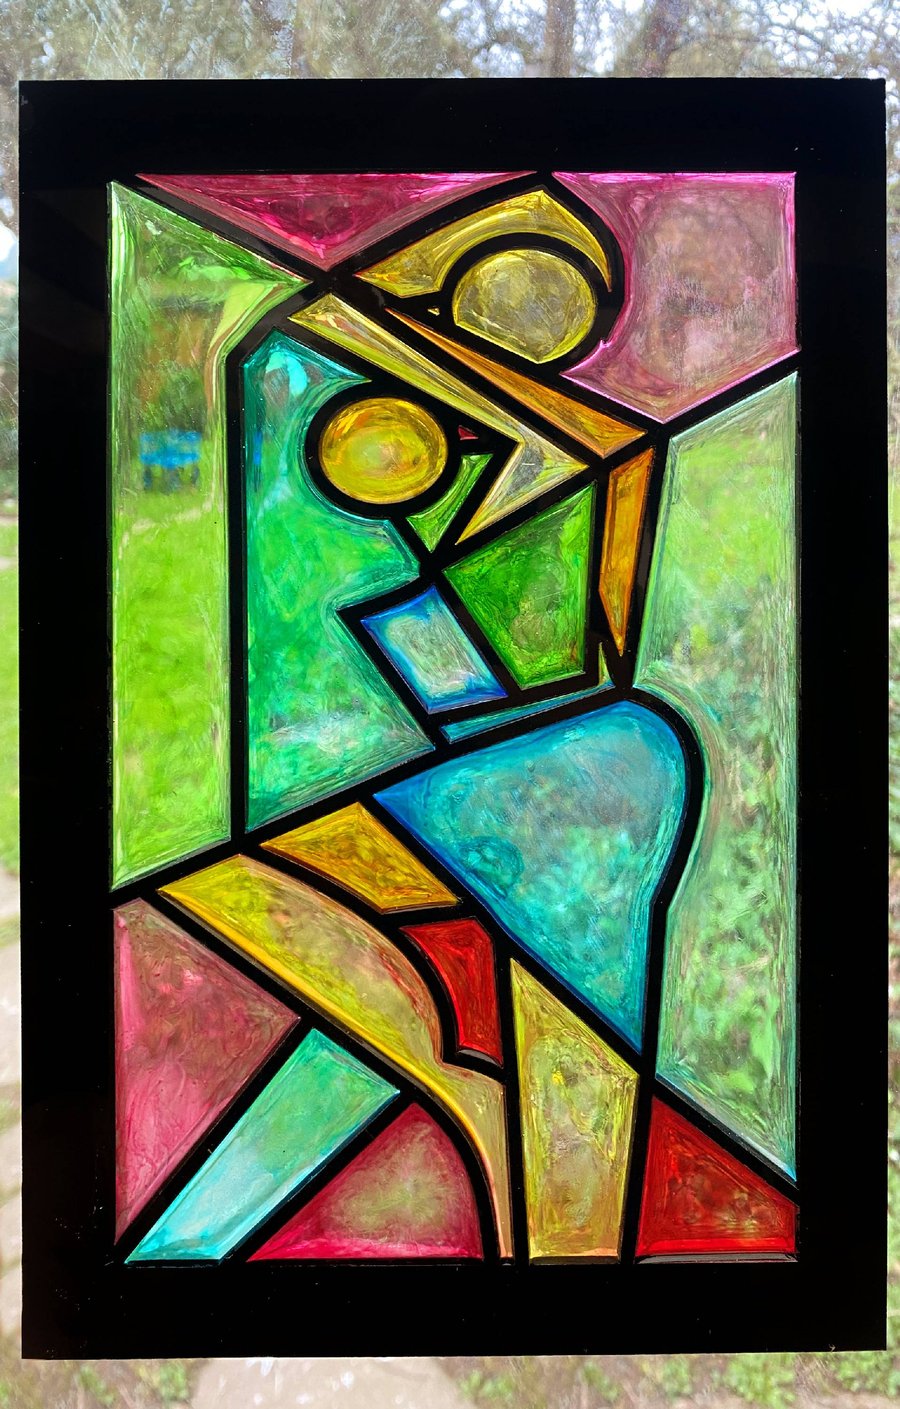 This is a unique art work, made from acrylic and resins.  The dancers embrace